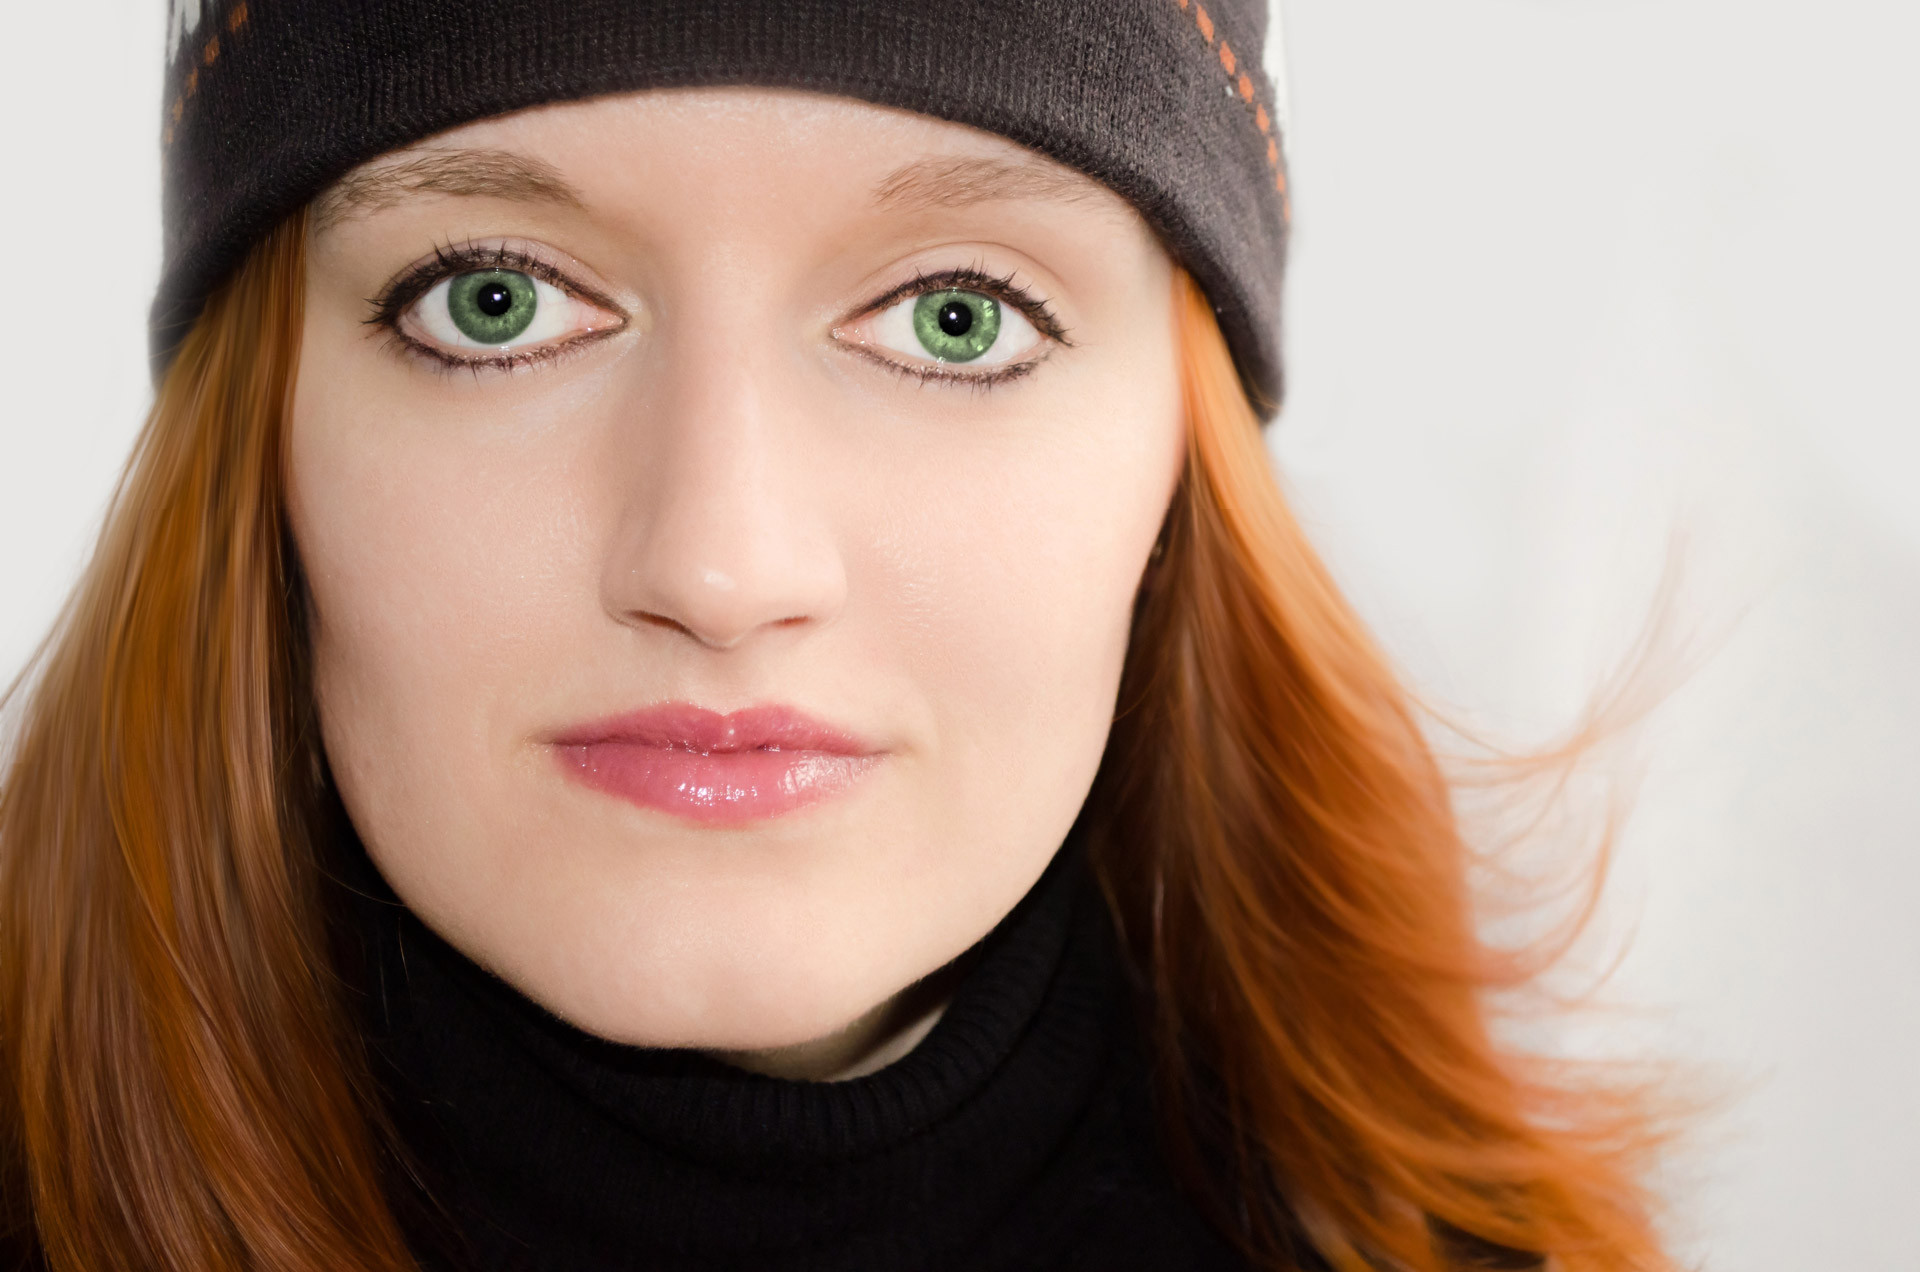 woman-with-green-eyes.jpg